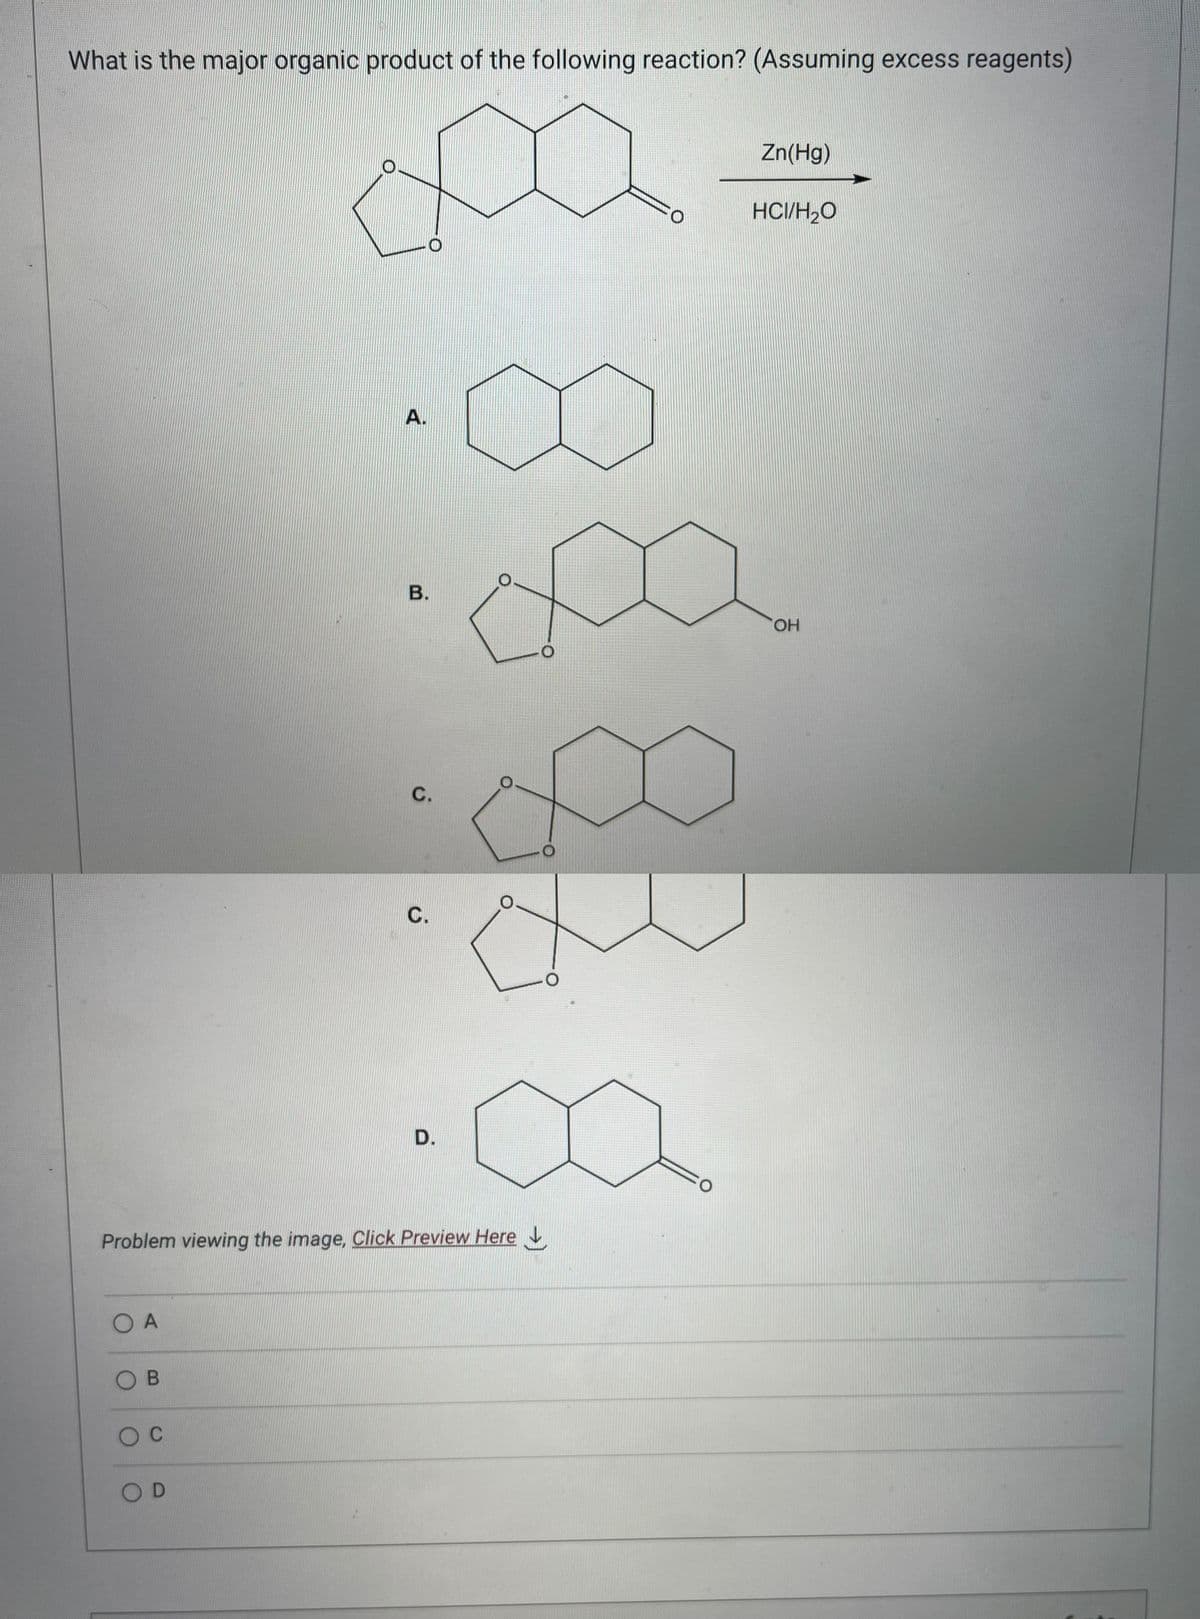 What is the major organic product of the following reaction? (Assuming excess reagents)
O A
OB
O C
A.
OD
B.
Problem viewing the image. Click Preview Here
C.
C.
D.
O
O
O
:0
Zn(Hg)
HCI/H₂O
OH